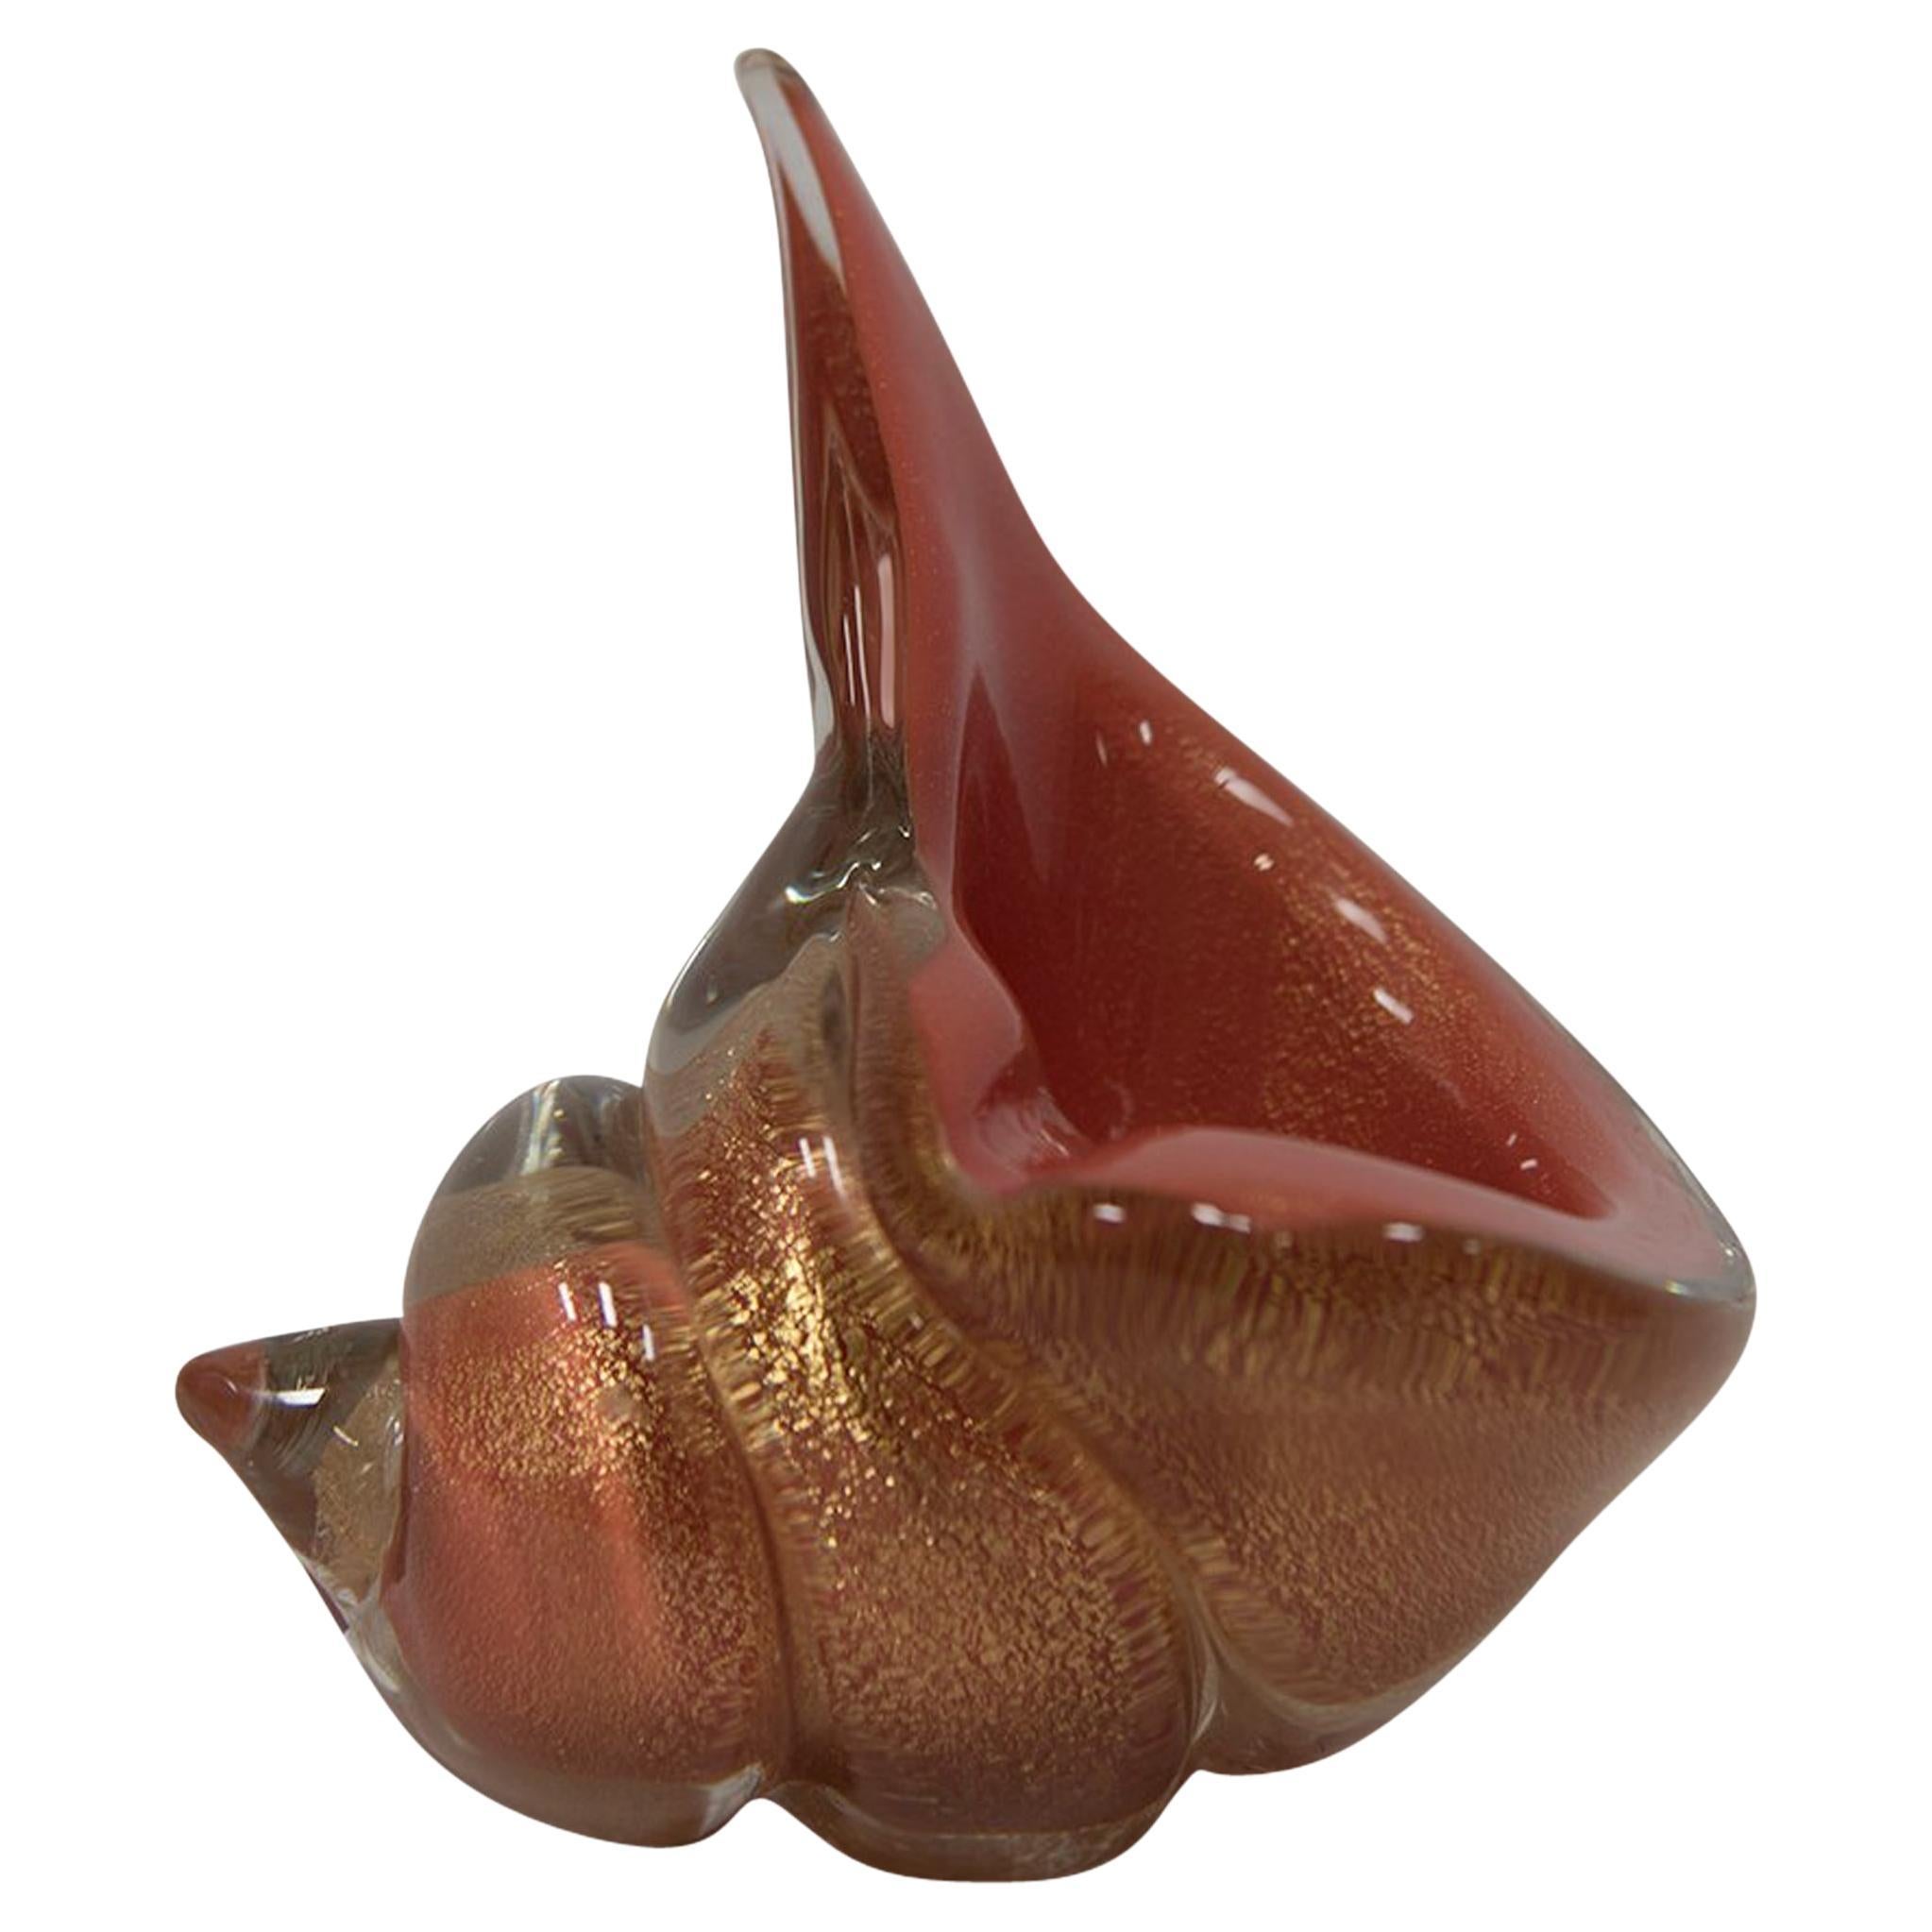 An undulating Italian midcentury clear and salmon colored triton-shaped art glass sea shell with gold inclusions, small air bubble on outer shell. Murano glass and attributed to Alfredo Barbini, circa 1950, Italy. Alfredo Barbini, a glass artist